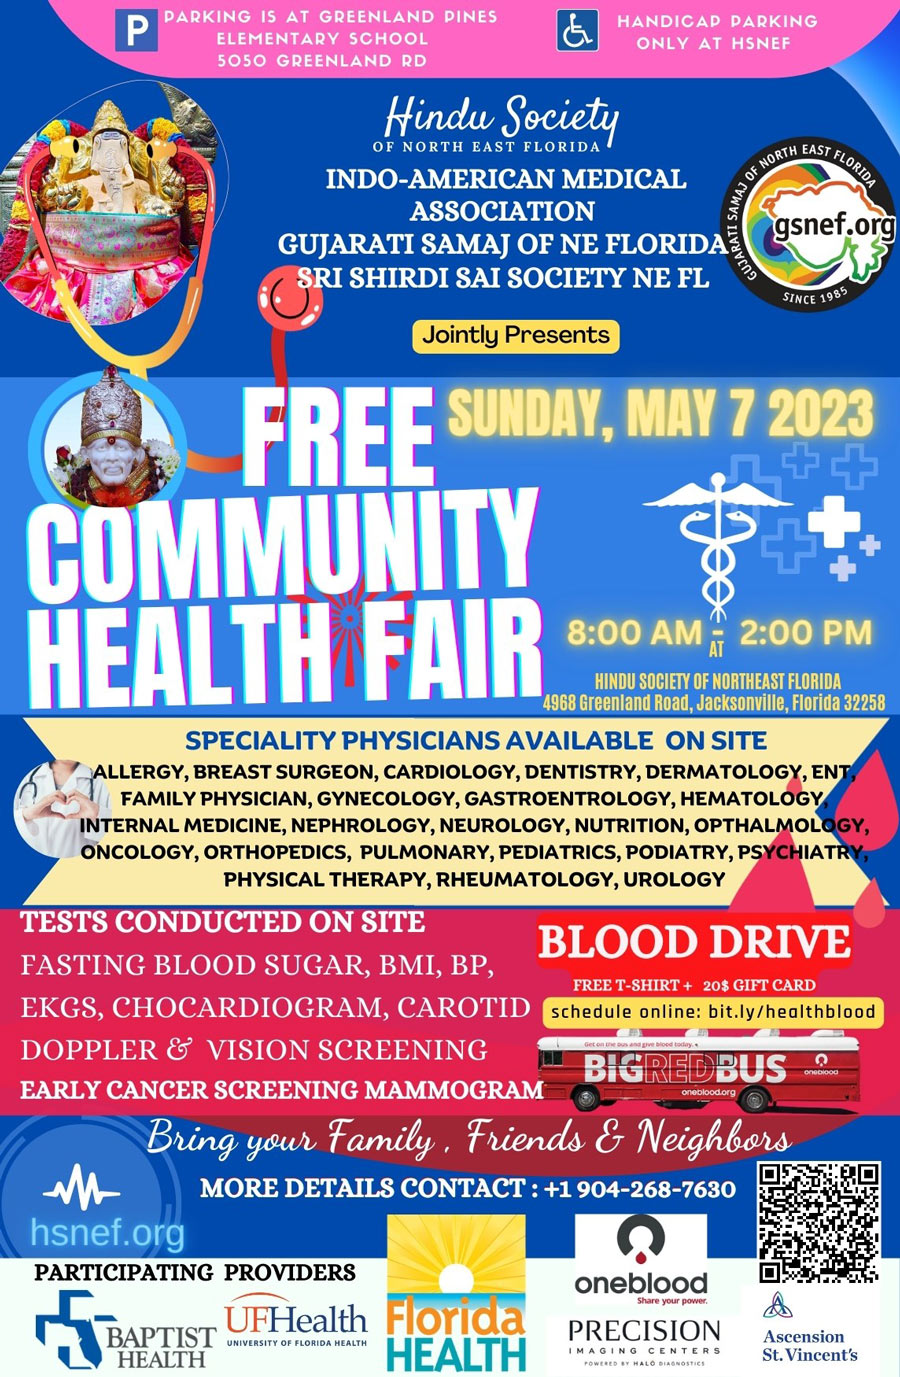 PARKING IS AT GREENLAND PINES
ELEMENTARY SCHOOL
5050 GREENLAND RD
HANDICAD PARKING
ONLY AT HSNEF
"Hindu Societo,
gsnef.org
OF NORTH EAST FLORIDA
INDO-AMERICAN MEDICAL ASSOCIATION
SINCE 19B5
GUJARATI SAMAJ OF NE FLORIDA
Jointly Presents SRI SHIRDI SAI SOCIETY NE FL
FREE SUHDAY, MAY 7 2023
COMMUNITY
HEALTH FAIR 800 AM " 200 PM
HINDU SOCIETY OF NORTHEAST FLORIDA
4968 Greenland Road, Jacksonville, Florida 32258
SPECIALITY PHYSICIANS AVAILABLE ON SITE
ALLERGY, BREAST SURGEON, CARDIOLOGY, DENTISTRY, DERMATOLOGY, ENT / FAMILY PHYSICIAN, GYNECOLOGY, GASTROENTROLOGY, HEMATOLOGY INTERNAL MEDICINE, NEPHROLOGY, NEUROLOGY, NUTRITION, OPTHALMOLOGY, ONCOLOGY, ORTHOPEDICS, PULMONARY, PEDIATRICS, PODIATRY, PSYCHIATRY PHYSICAL THERAPY, RHEUMATOLOGY, UROLOGY
TESTS CONDUCTED ON SITE
BLOOD DRIVE
FASTING BLOOD SUGAR, BMI, BP,
FREE T-SHIRT + 20$ GIFT CARD
EKGS, CHOCARDIOGRAM, CAROTID
schedule online: bit.ly/healthblood
DOPPLER & VISION SCREENING
BIGREDBUS
EARLY CANCER SCREENING MAMMOGRAM
Bring your Family, Friends & Neighbors
MORE DETAILS CONTACT : +1 904-268-7630
hsnef.org
PARTICIPATING PROVIDERS
BAPTIST
UFHealth Florida
UNIVERSITY OF FLORIDA HEALTH
HEALTH
HEALTH
oneblood
Share your pow
PRECISION
IMAGINGCENTERS
Ascension
St. Vincent's